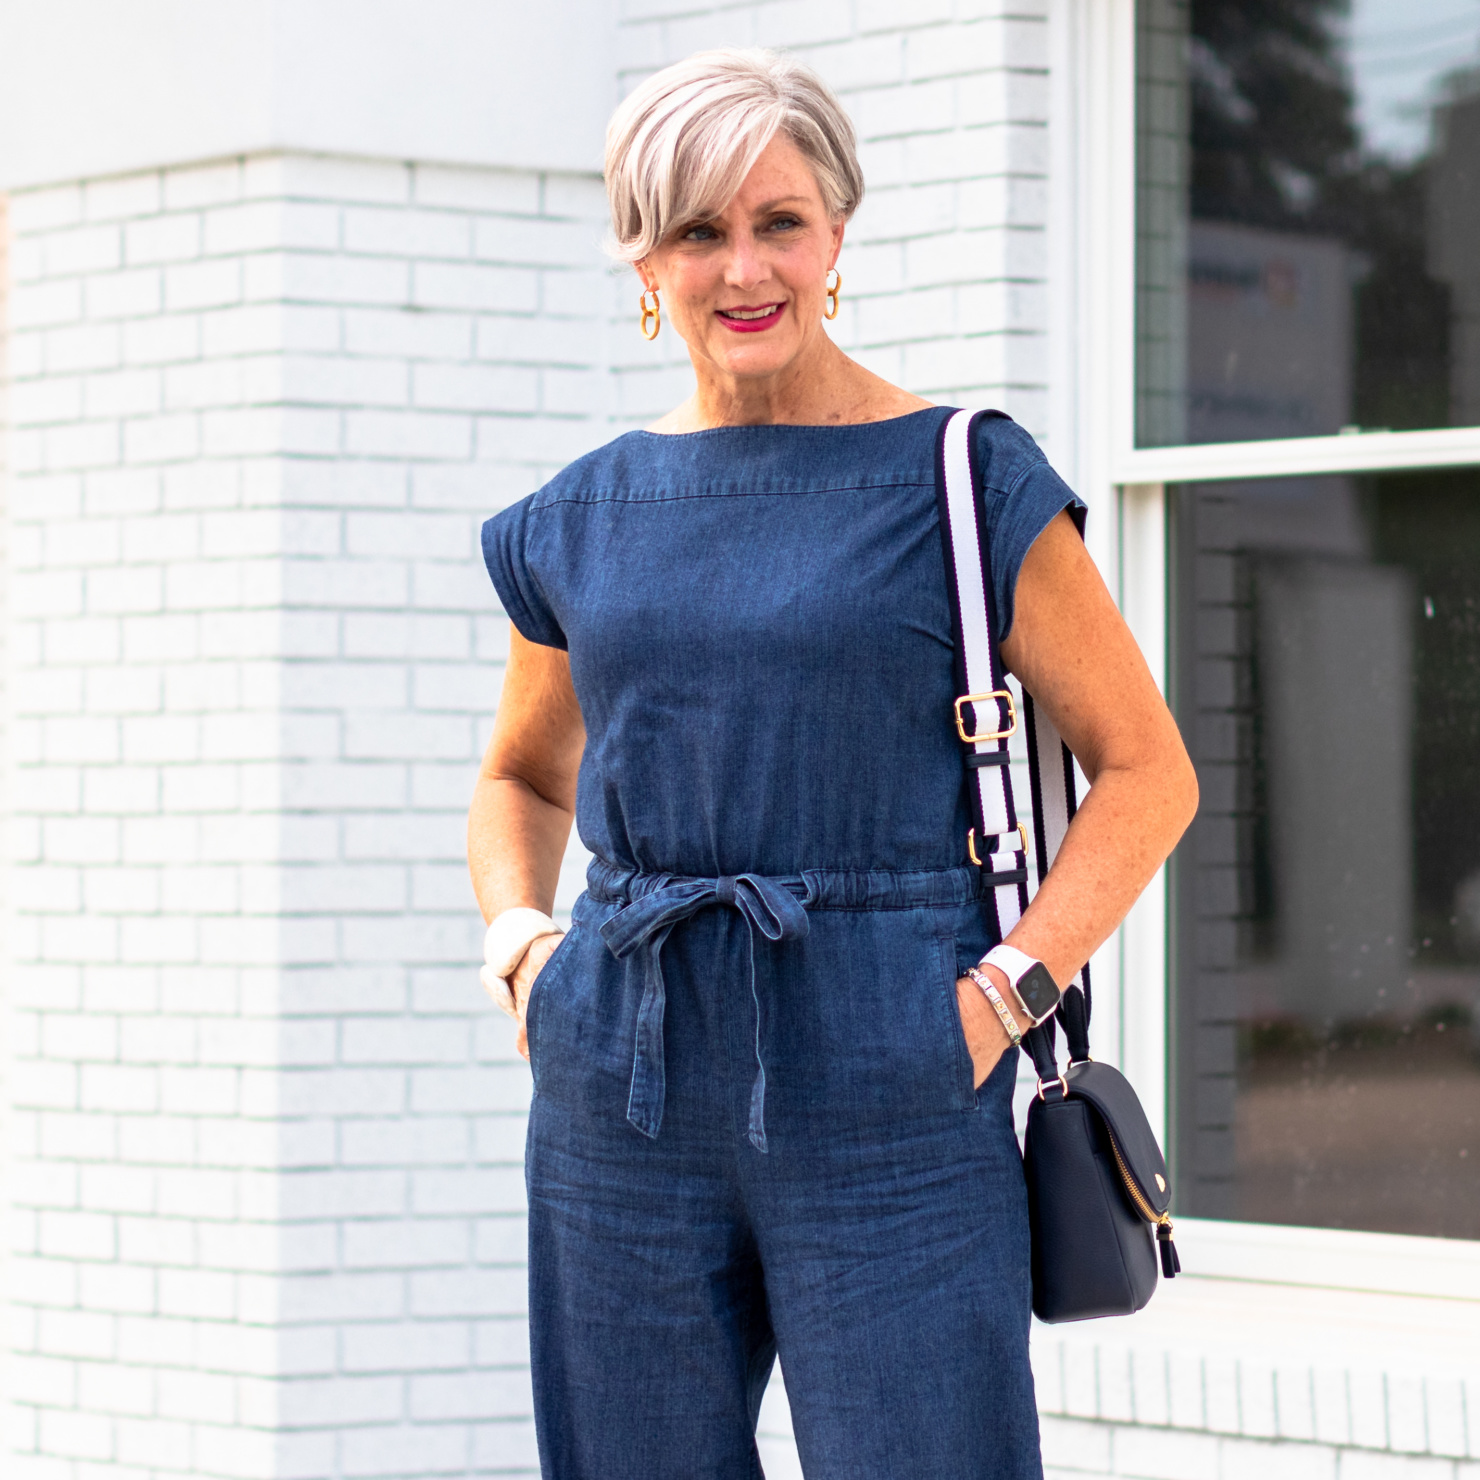 Are you ready for the new fashion season? Be bold with a jumpsuit for fall